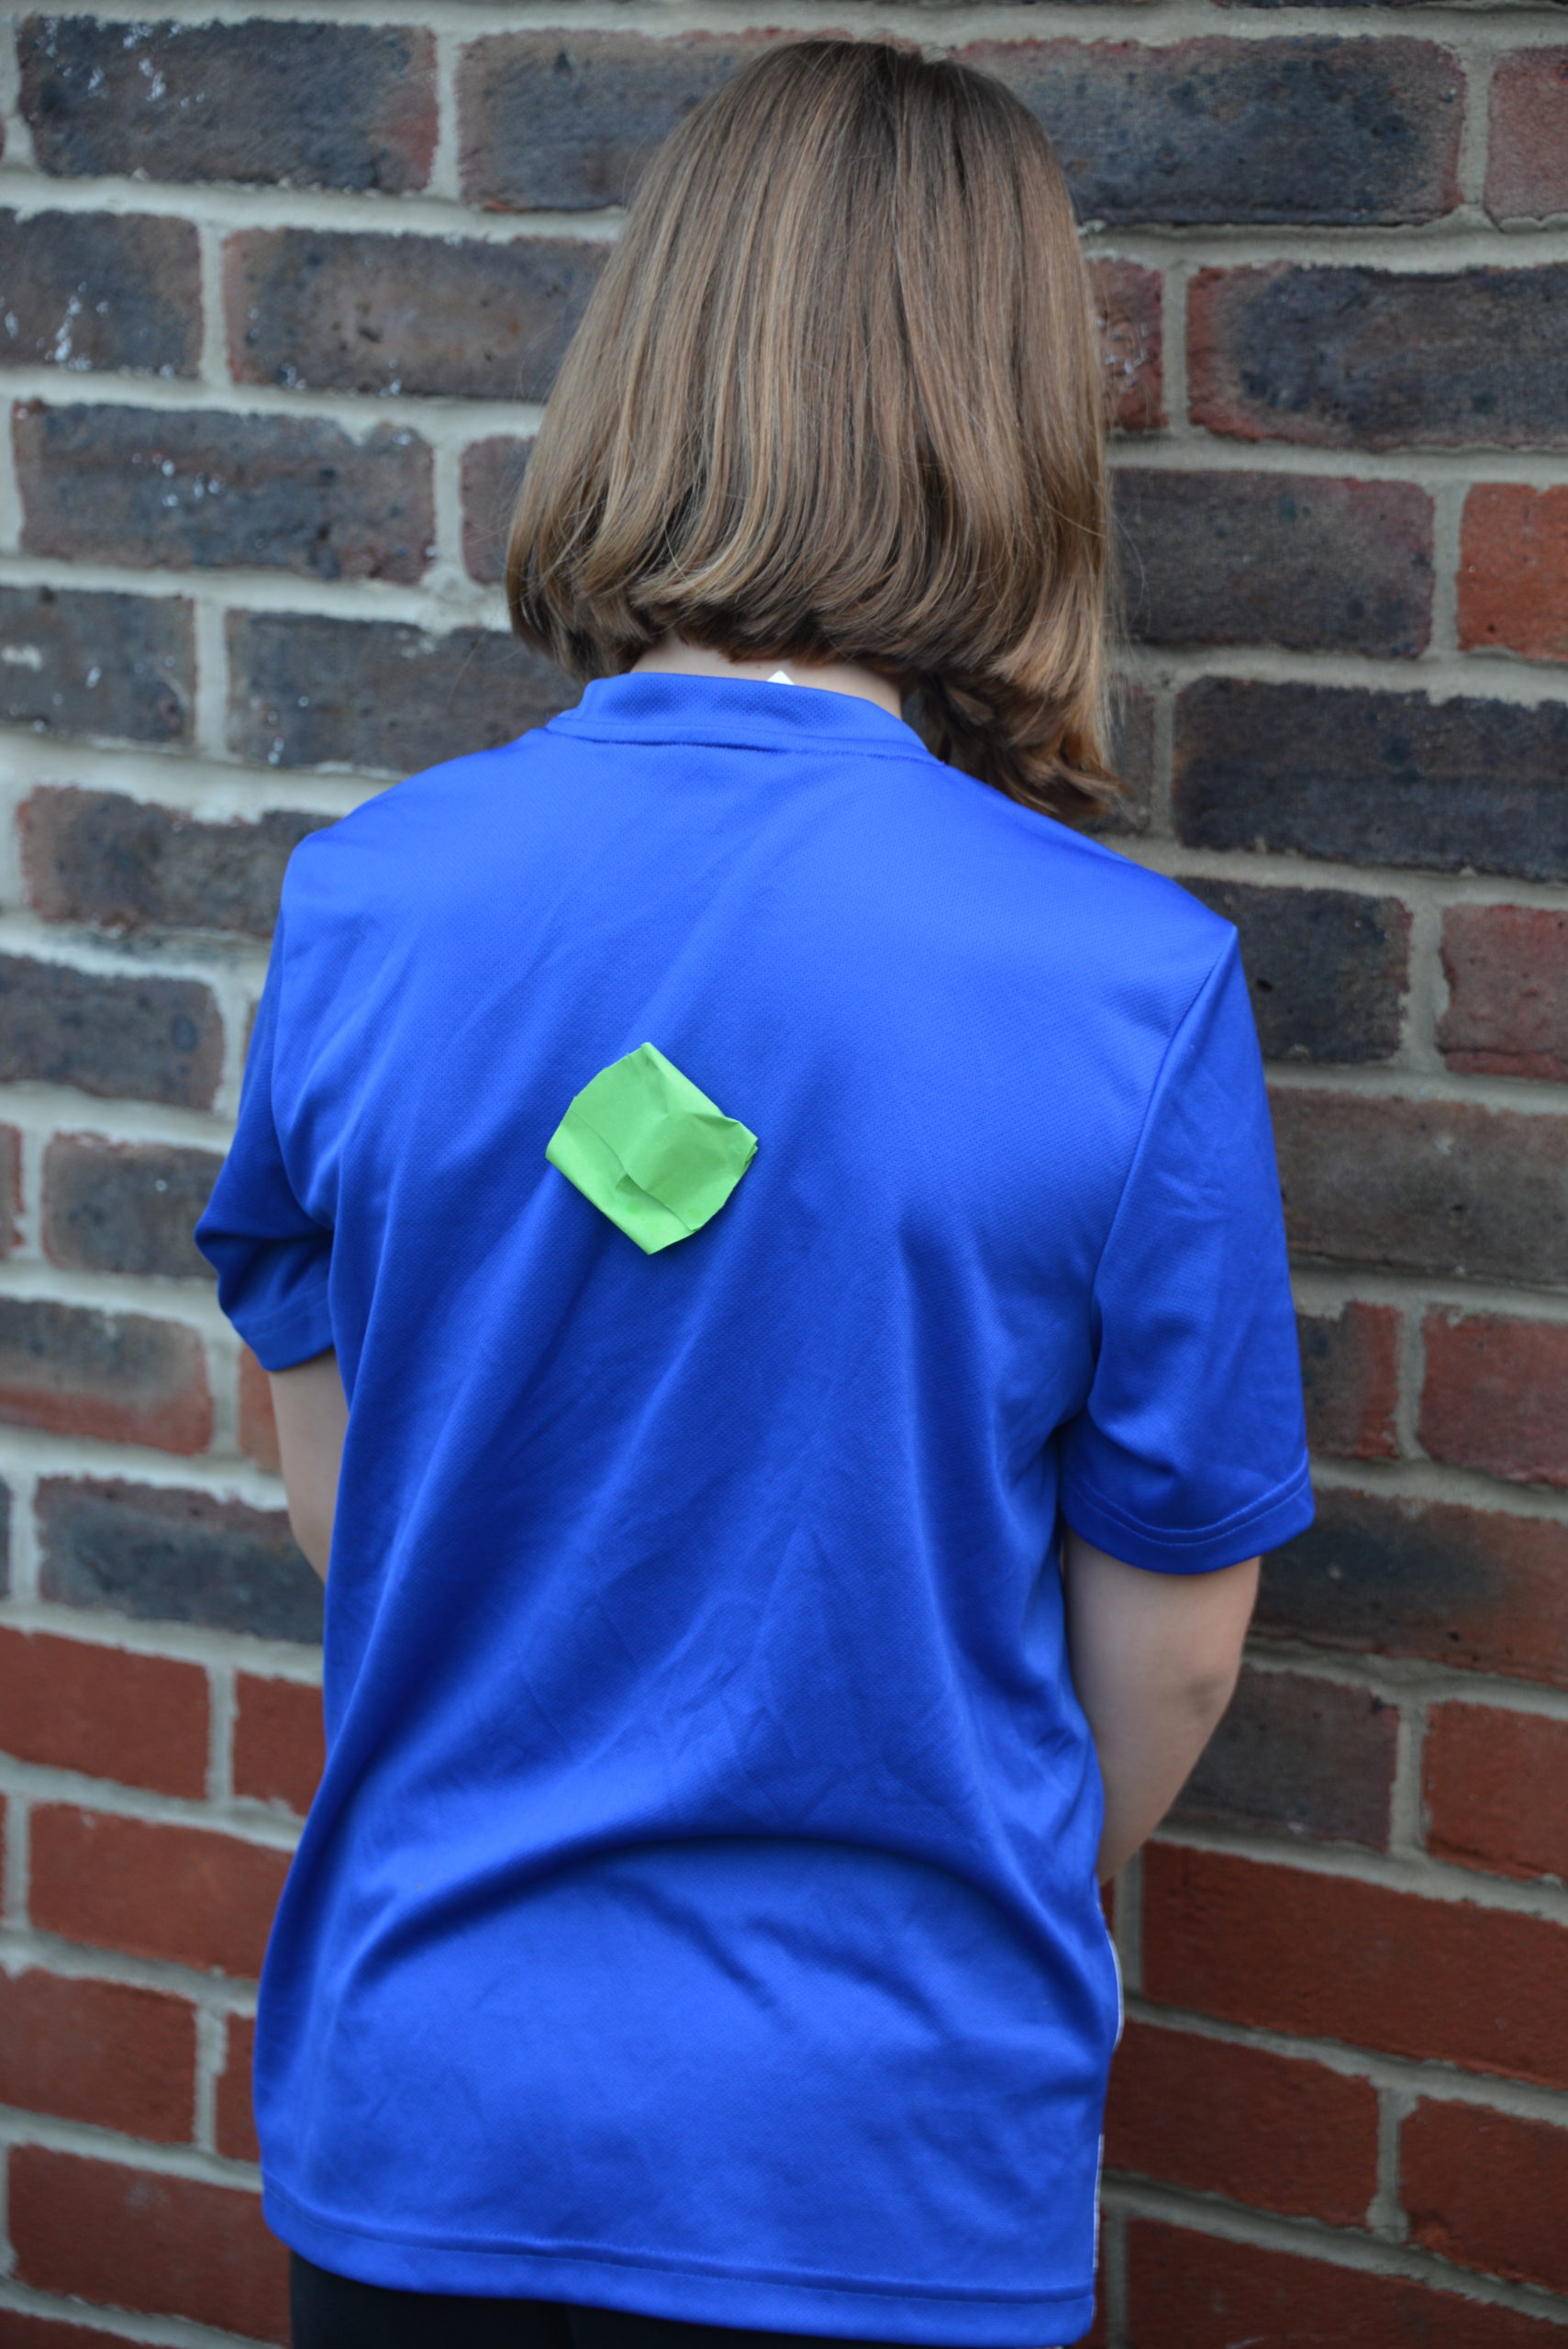 sticky seed attached to a girls t shirt as part of a seed dispersal activity